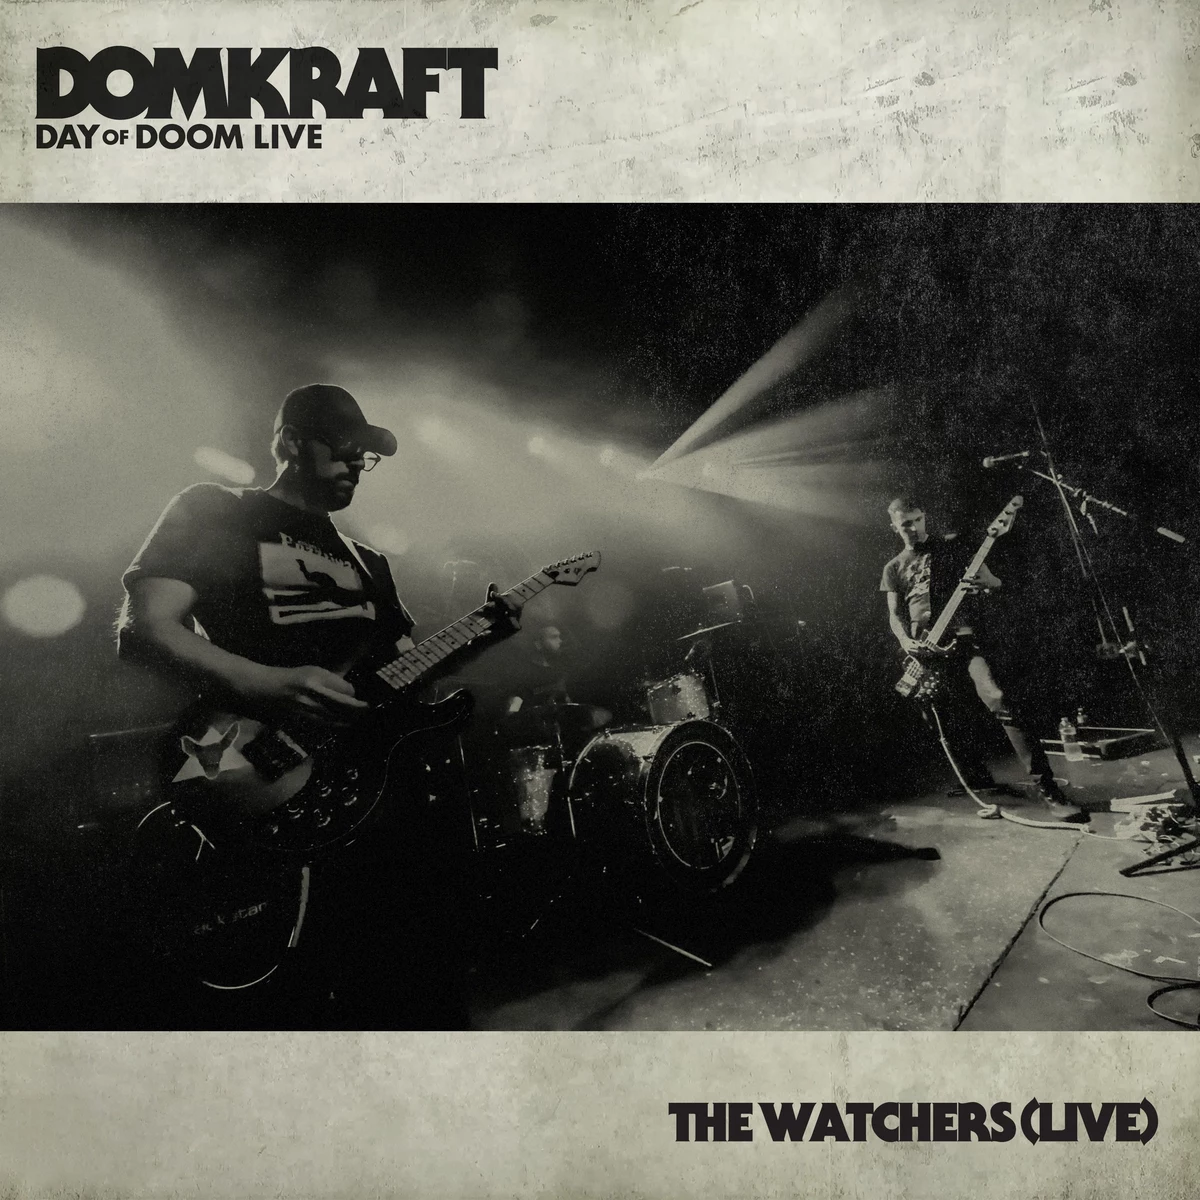 “The Watchers”: Bear Witness to Domkraft’s Hallucinatory Sludge Made Real